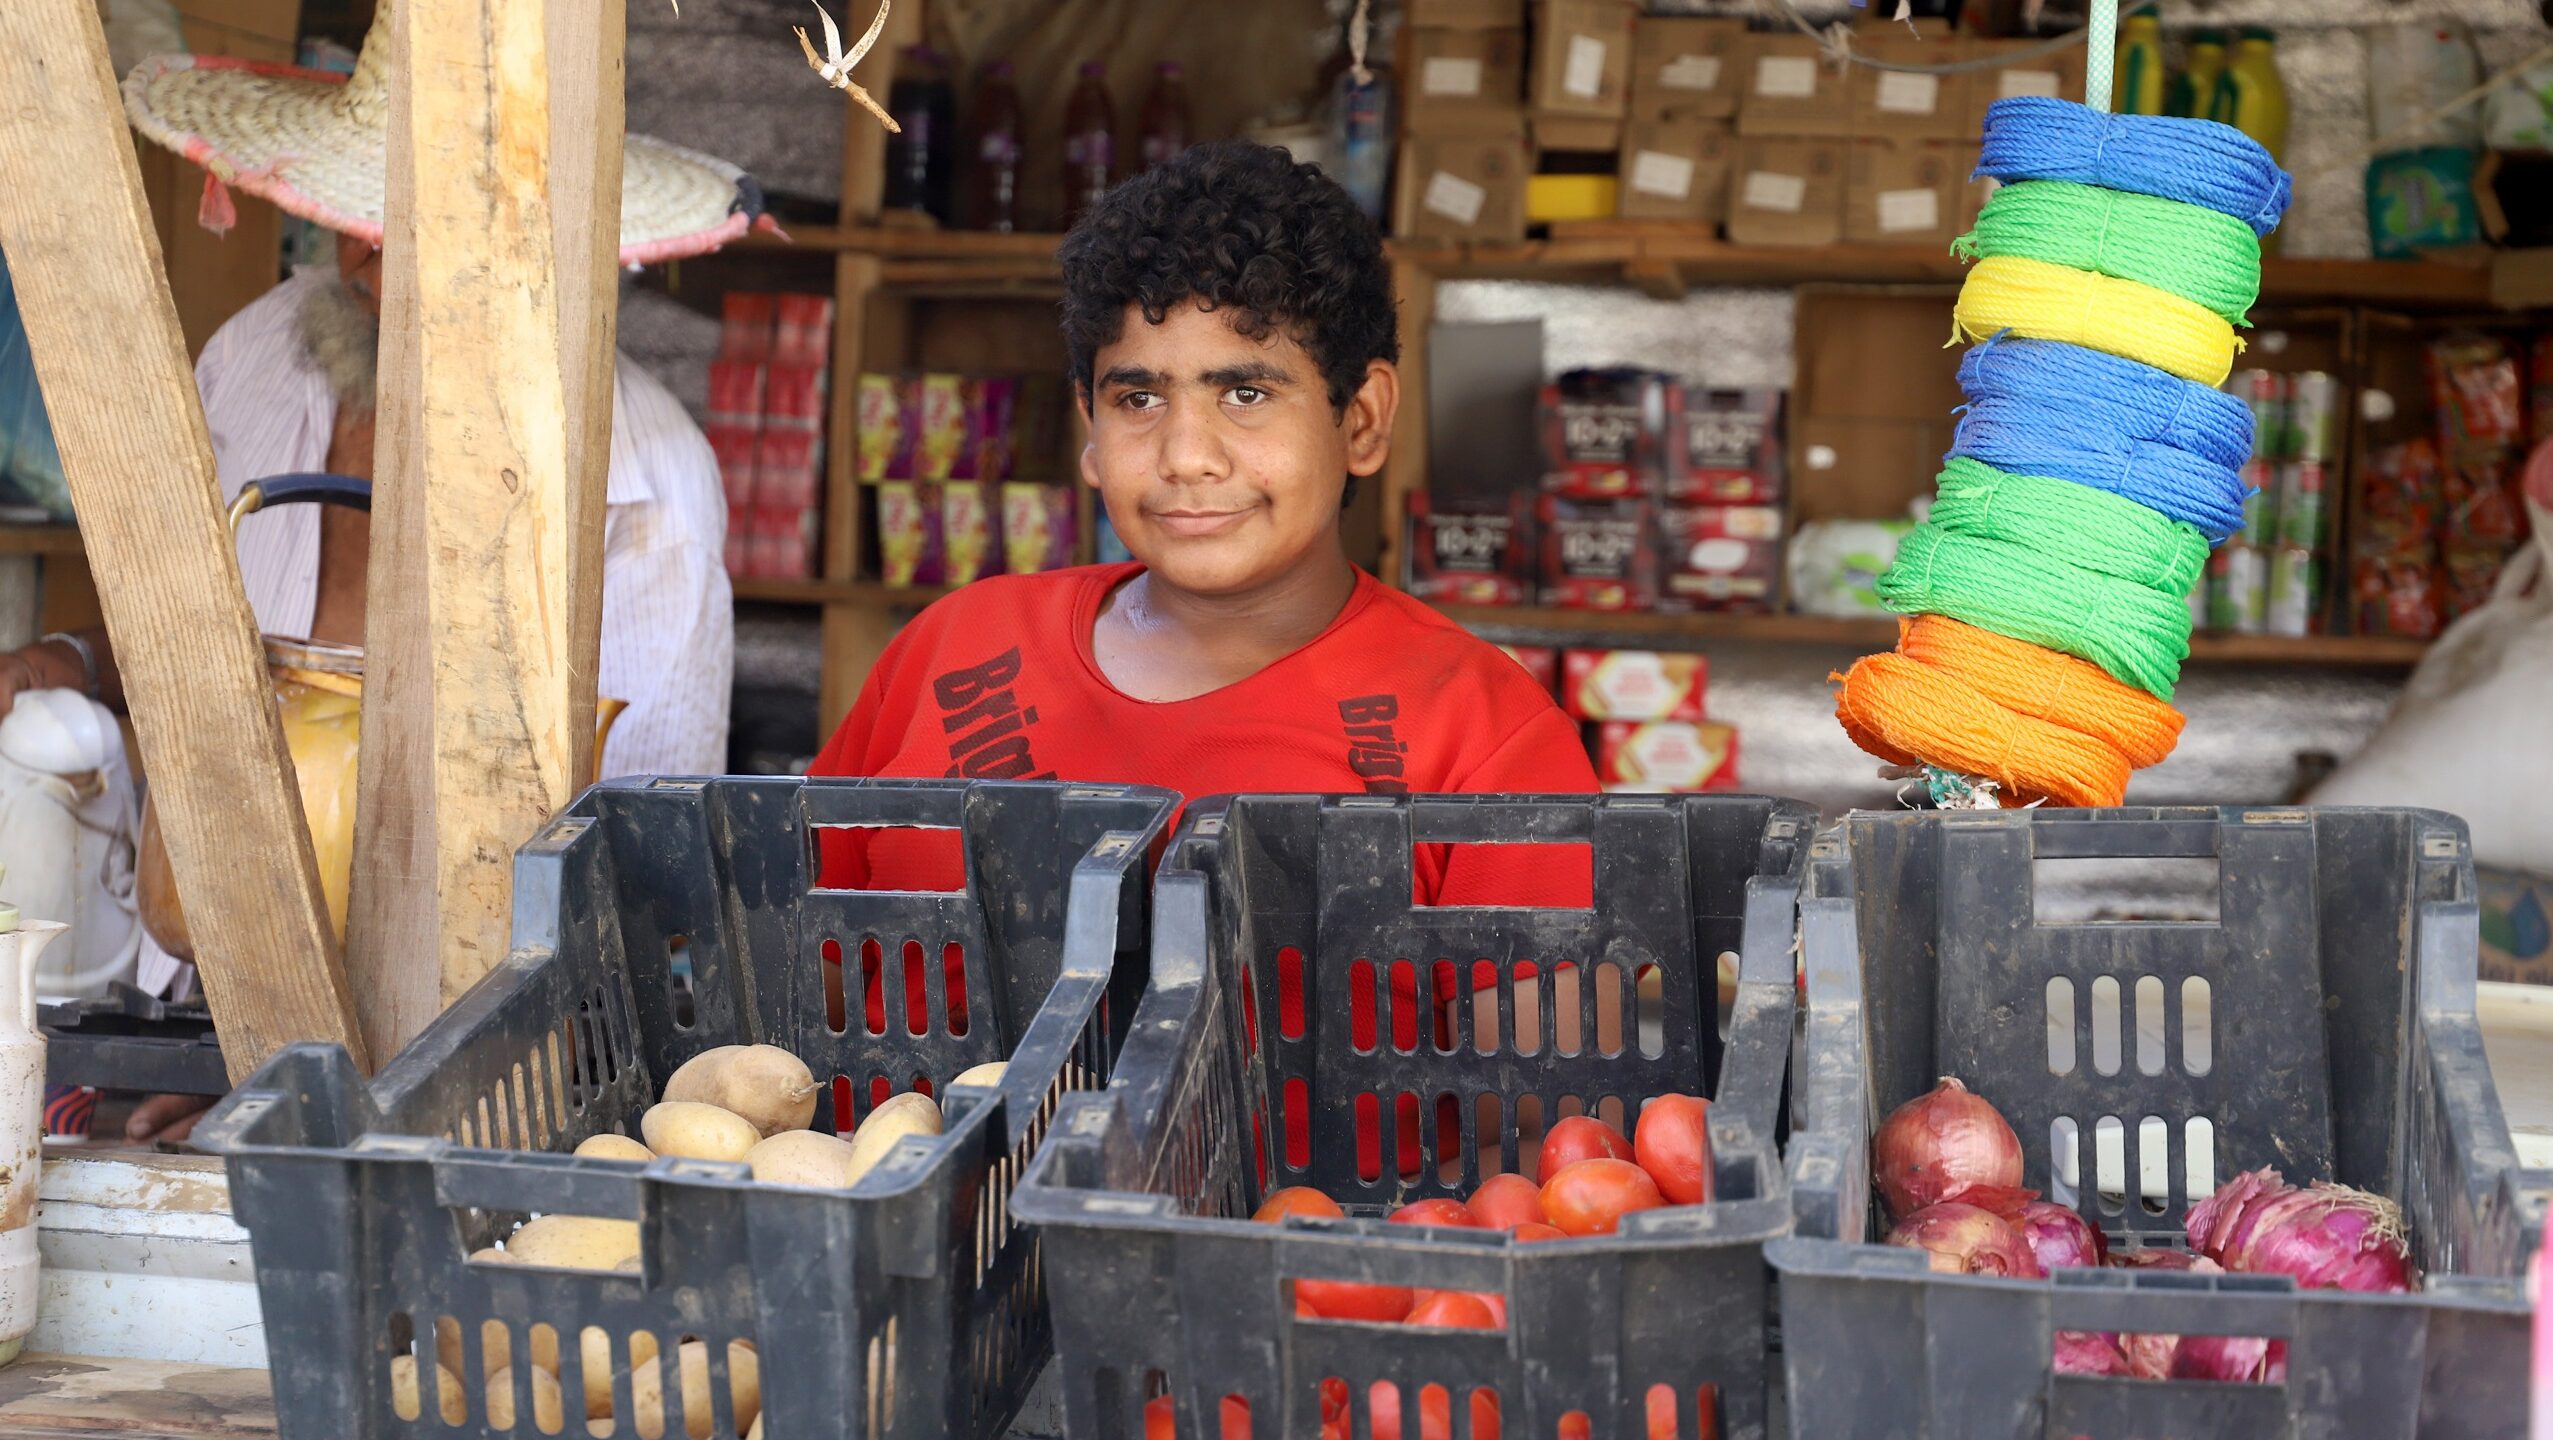 Jordan, Egypt Stand Out in the Fight Against Child Labor in the Arab World